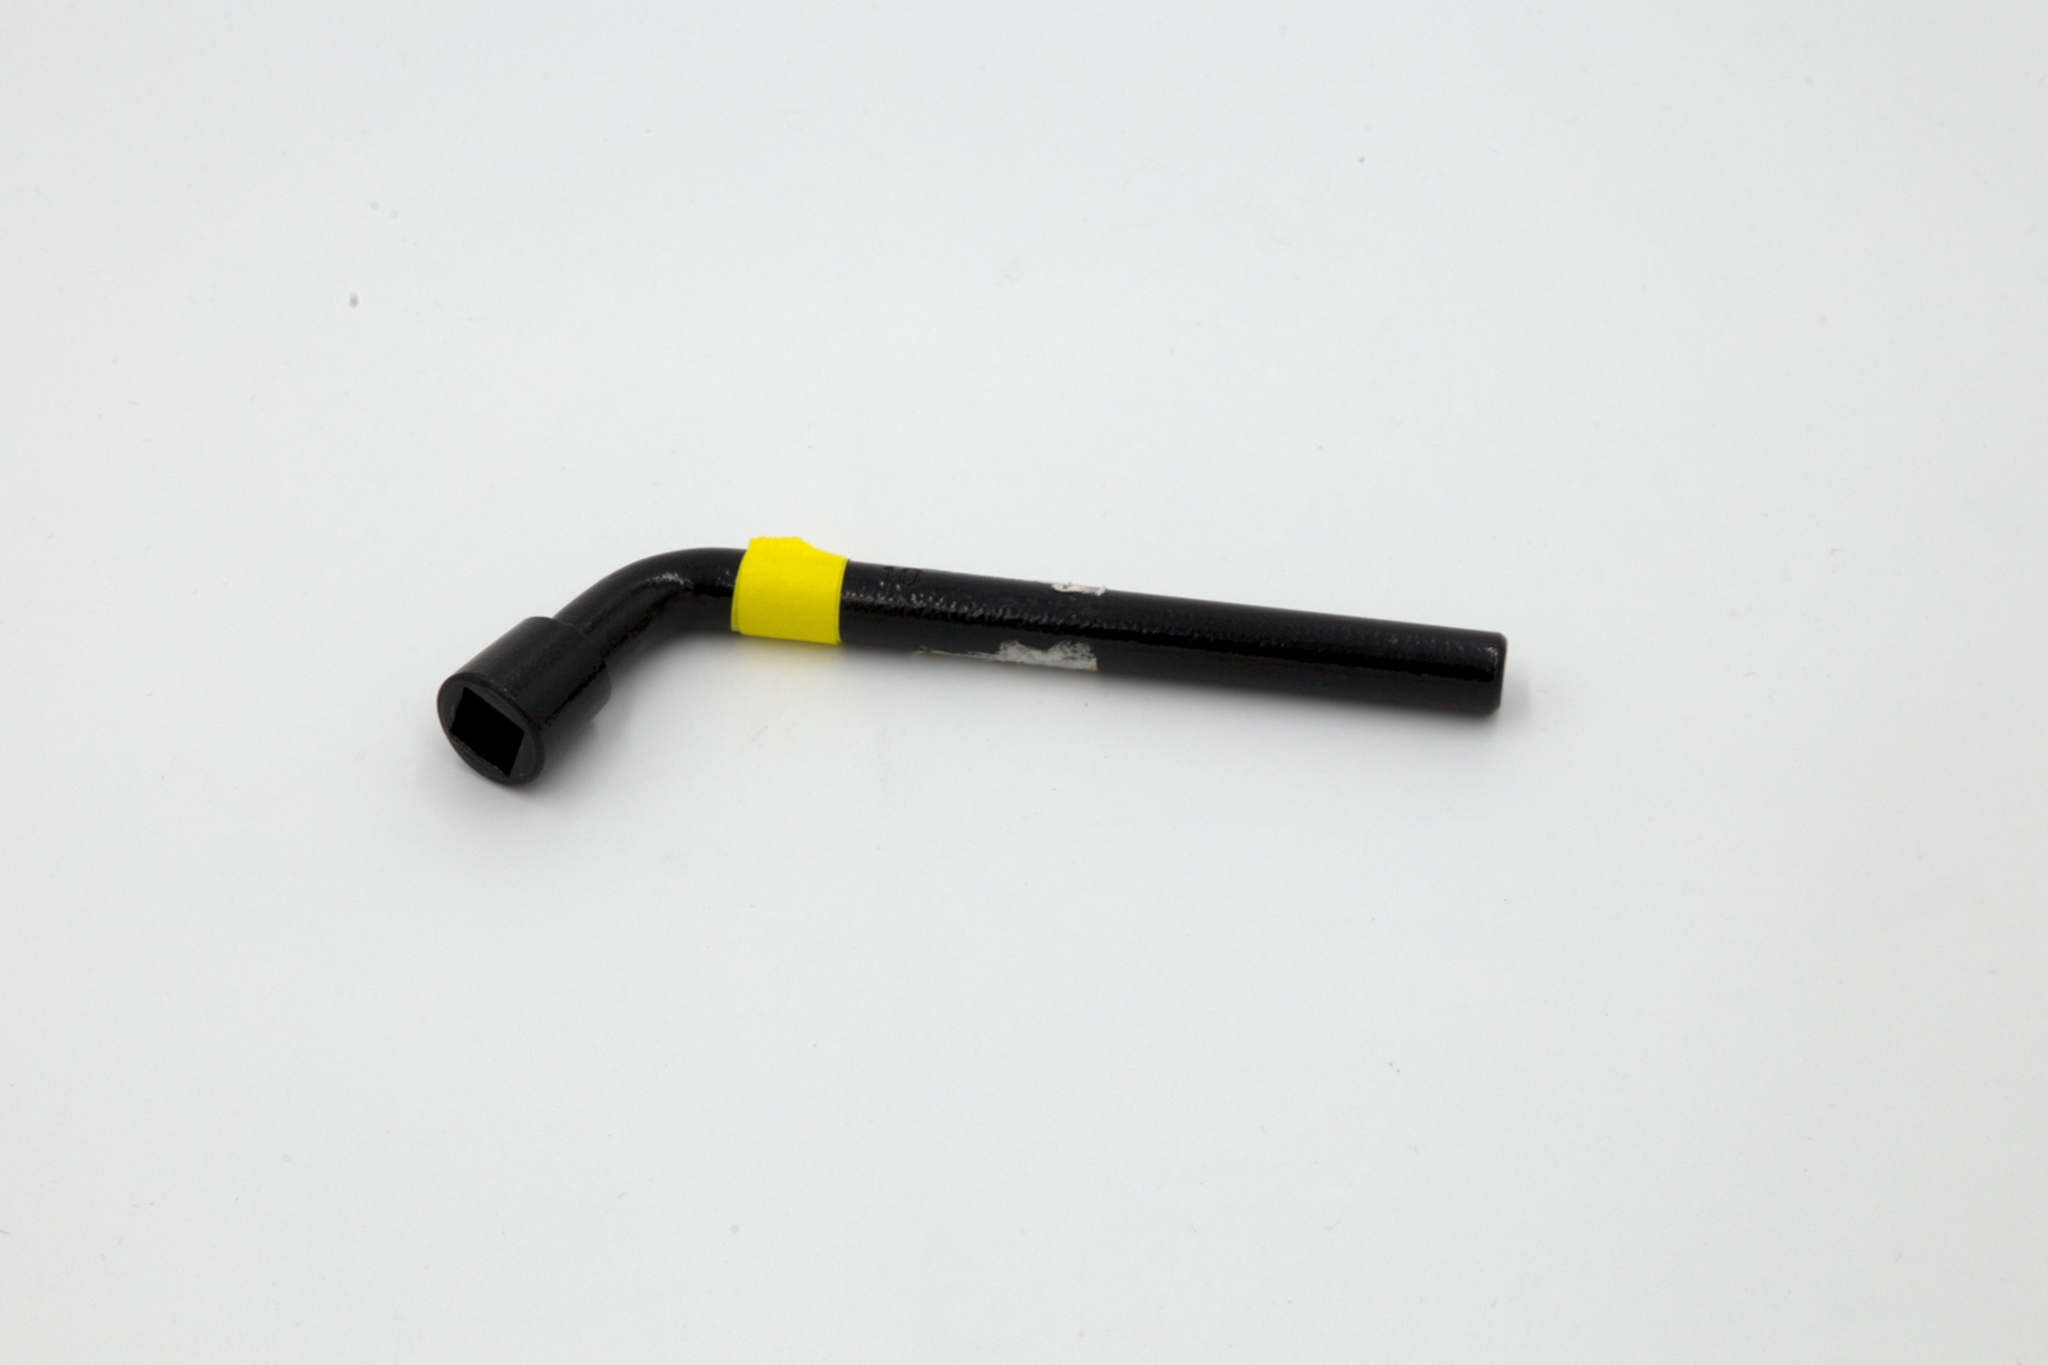 Black square wrench on white background